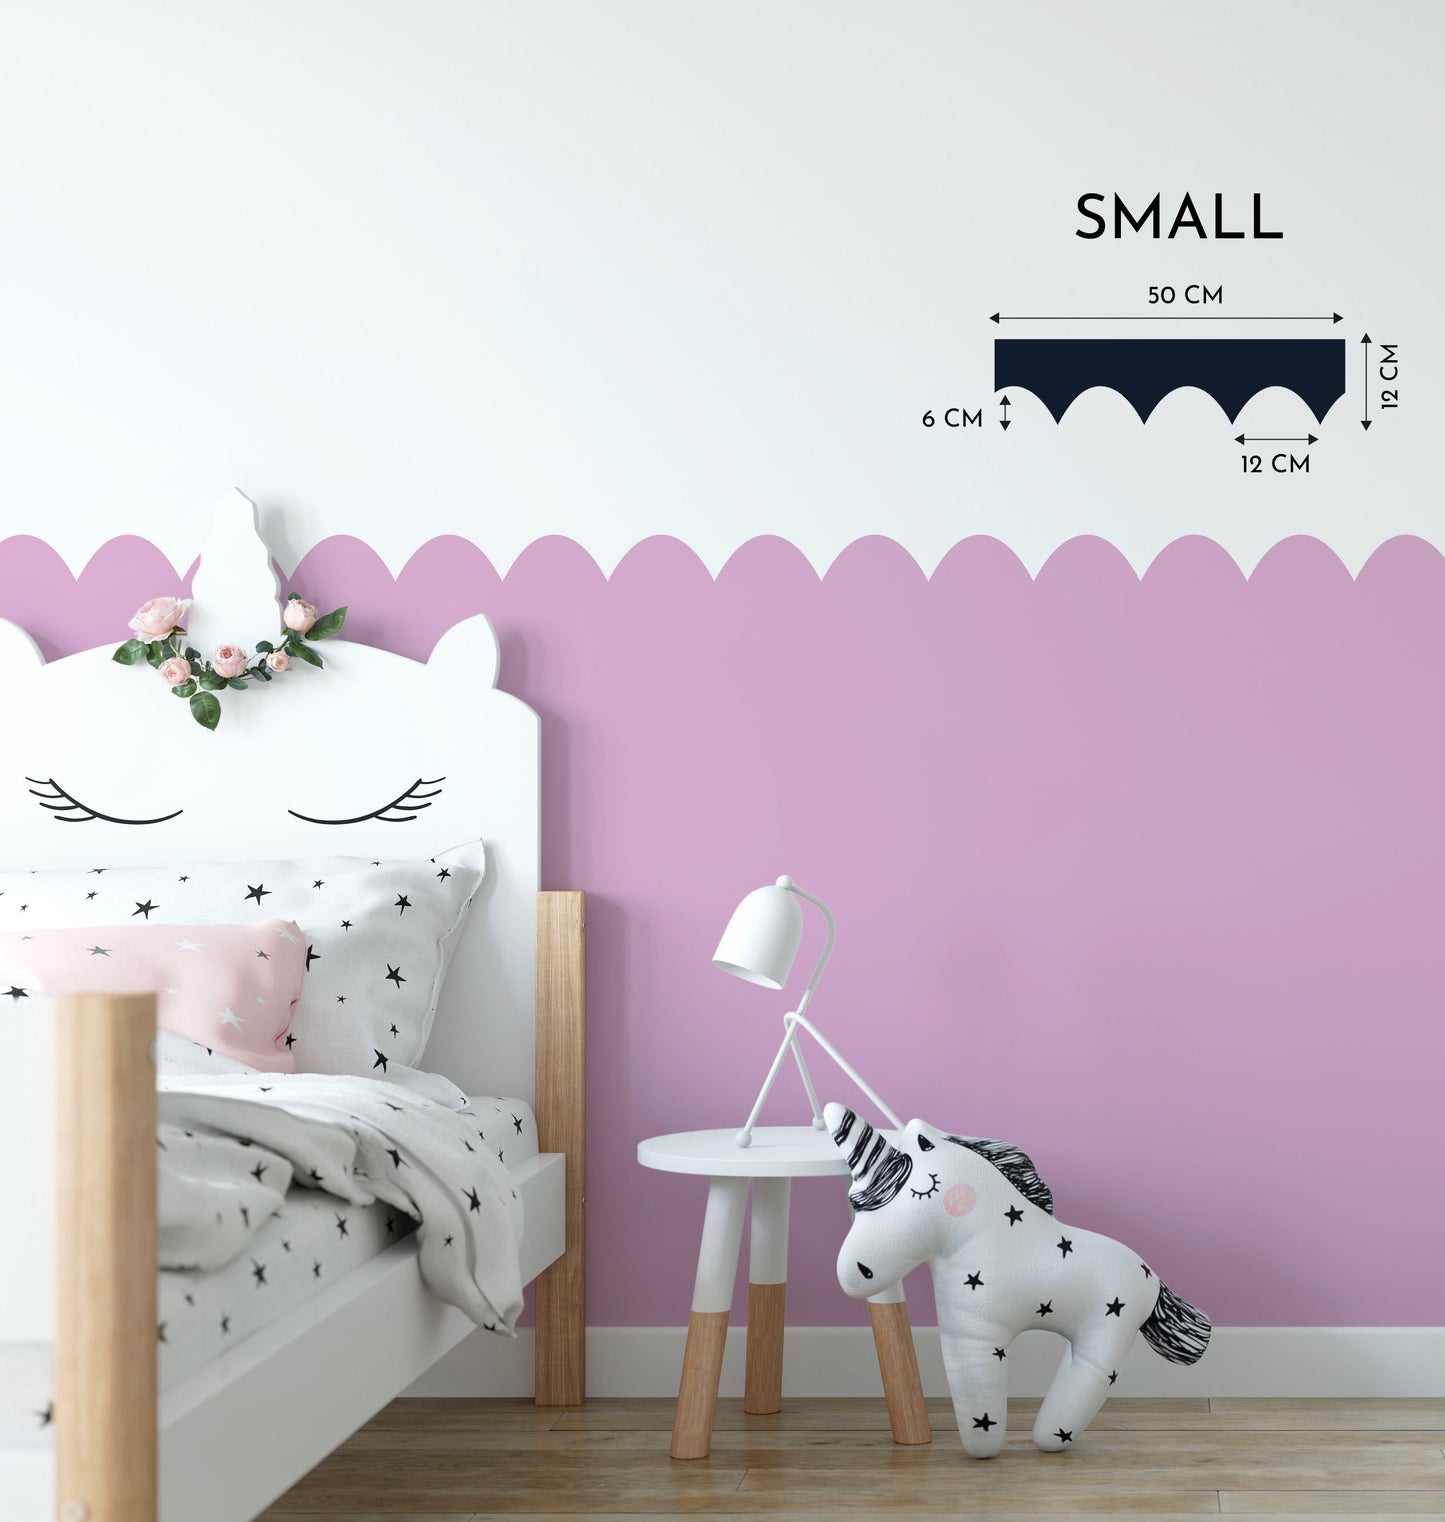 Scallop Wall Decal Stencil Boarder For Painting | Kids Room Boarder For Nursery Kids Children's Boys & Girls Removable Stencils